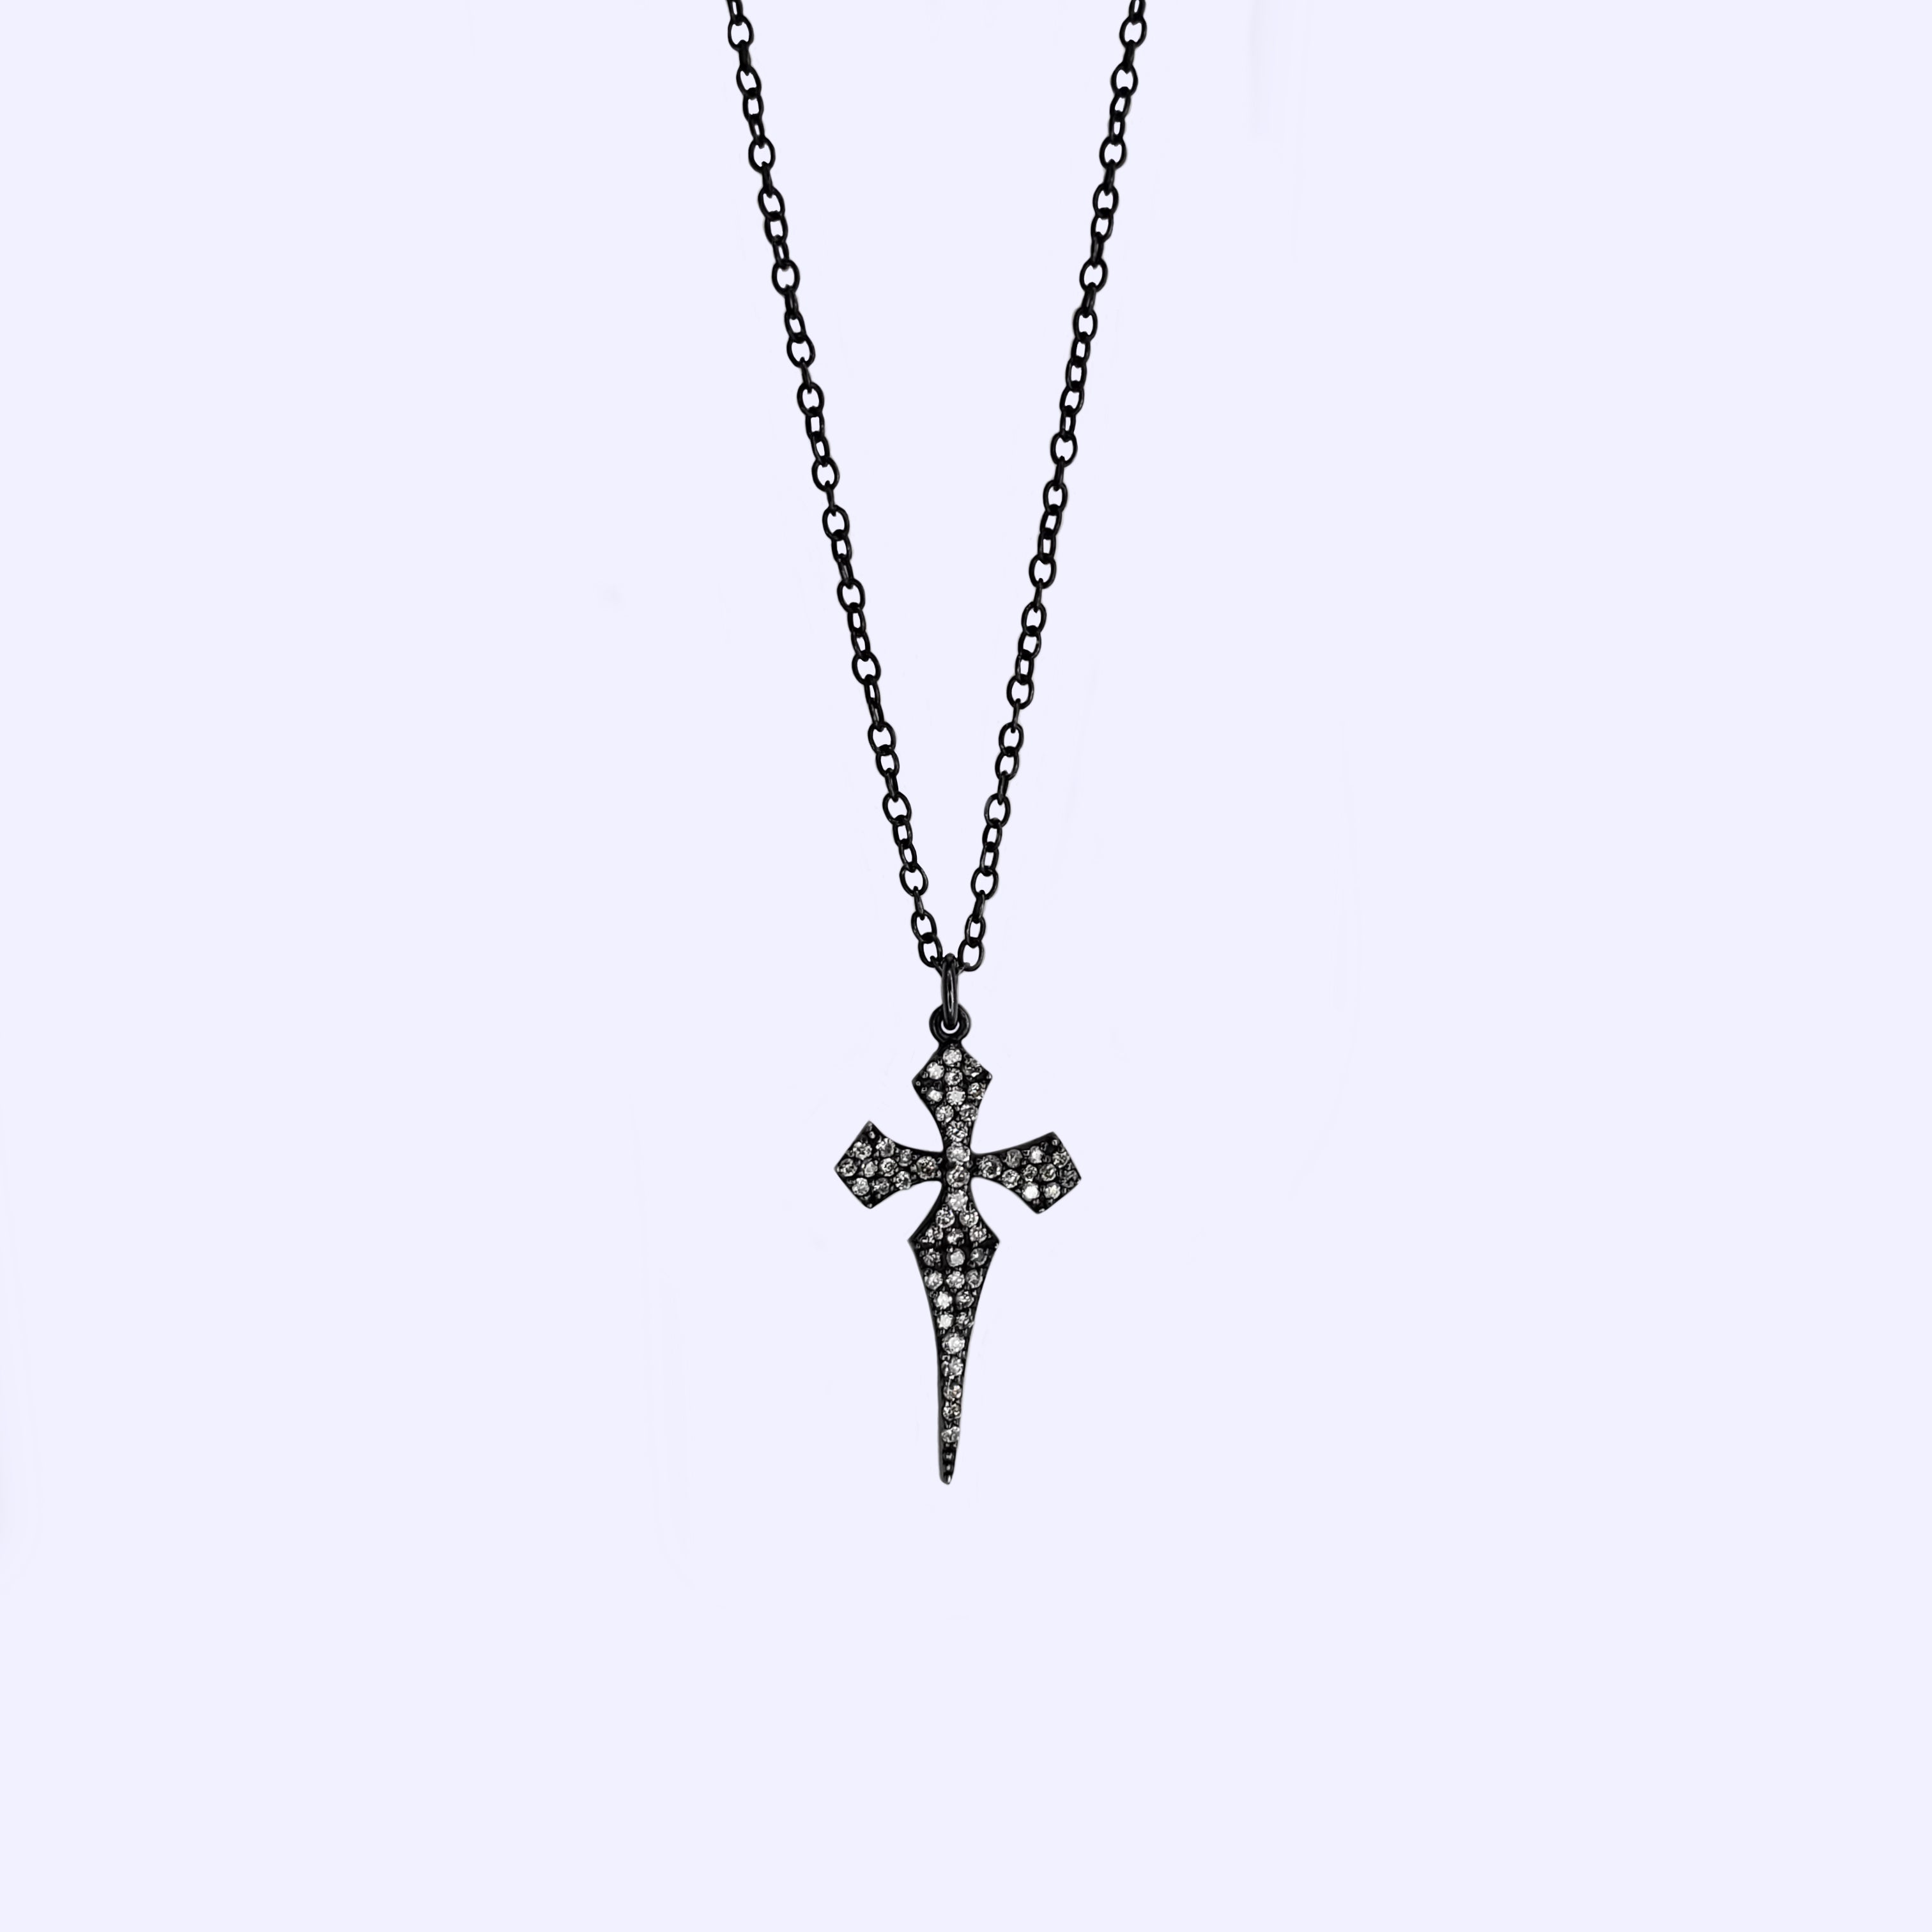 Blackened Sterling Silver and Diamond Cross Pendant Necklace